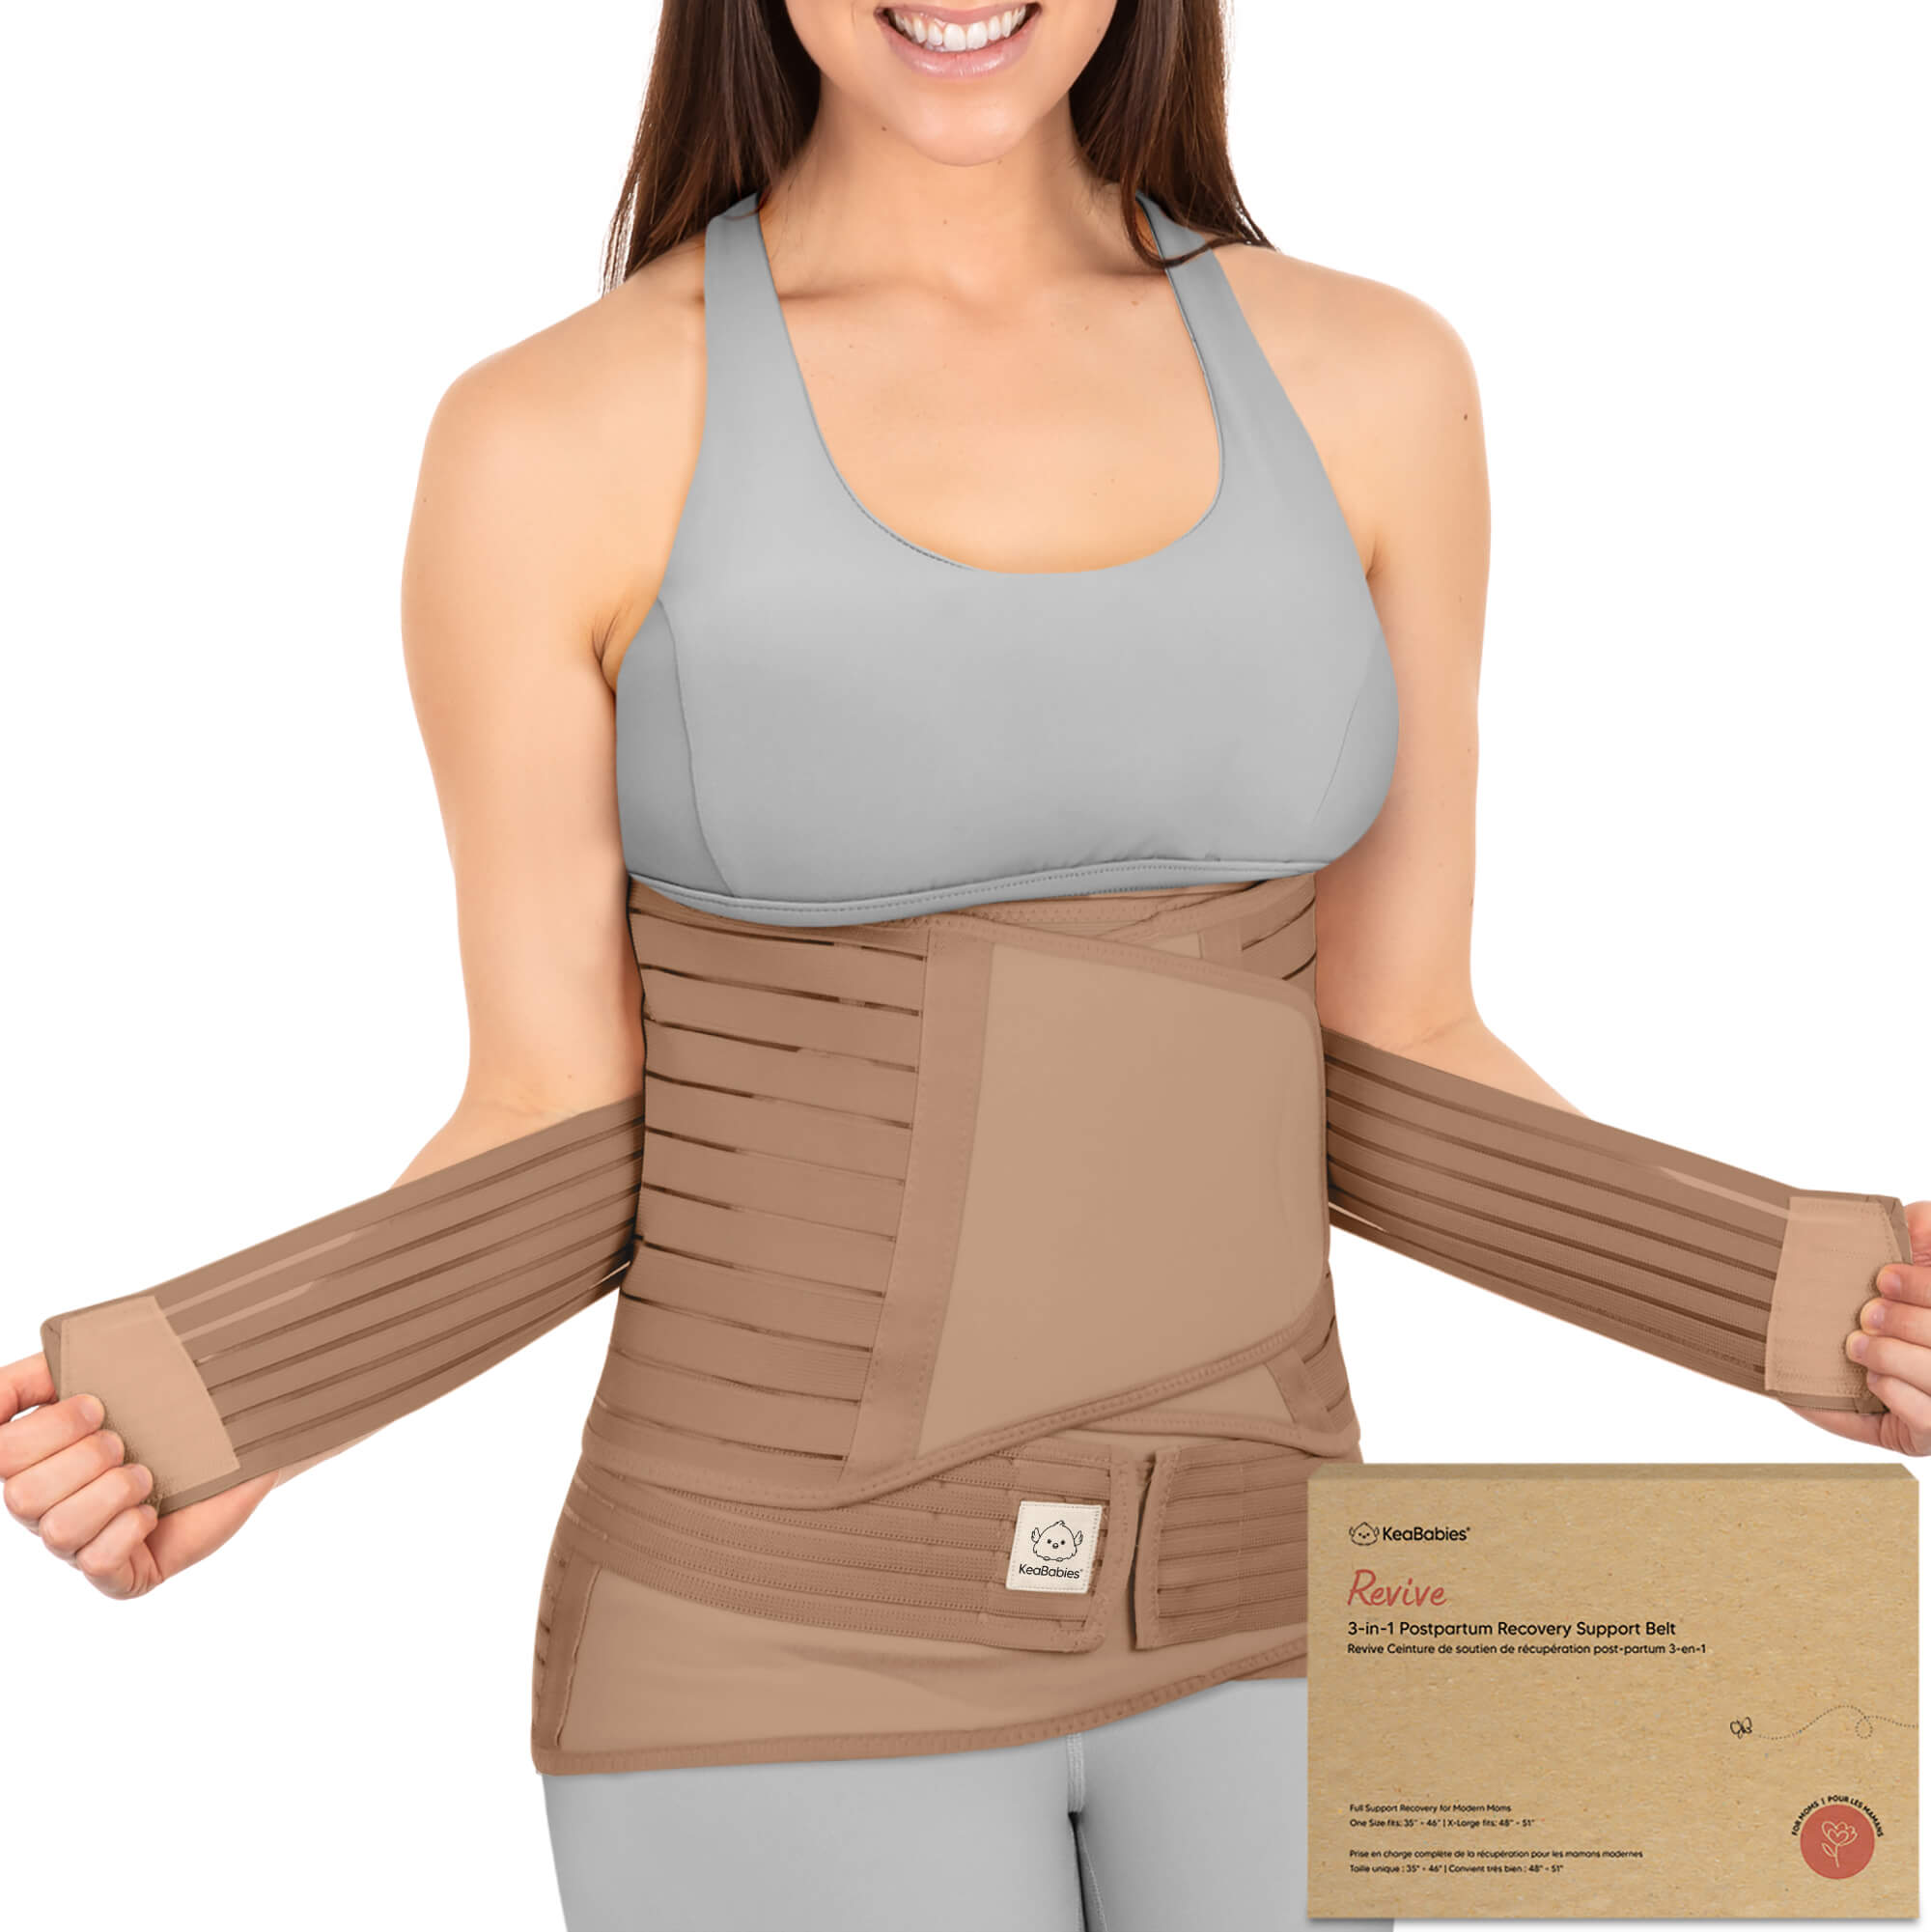 Revive 3-in-1 Postpartum Recovery Support Belt – KeaBabies